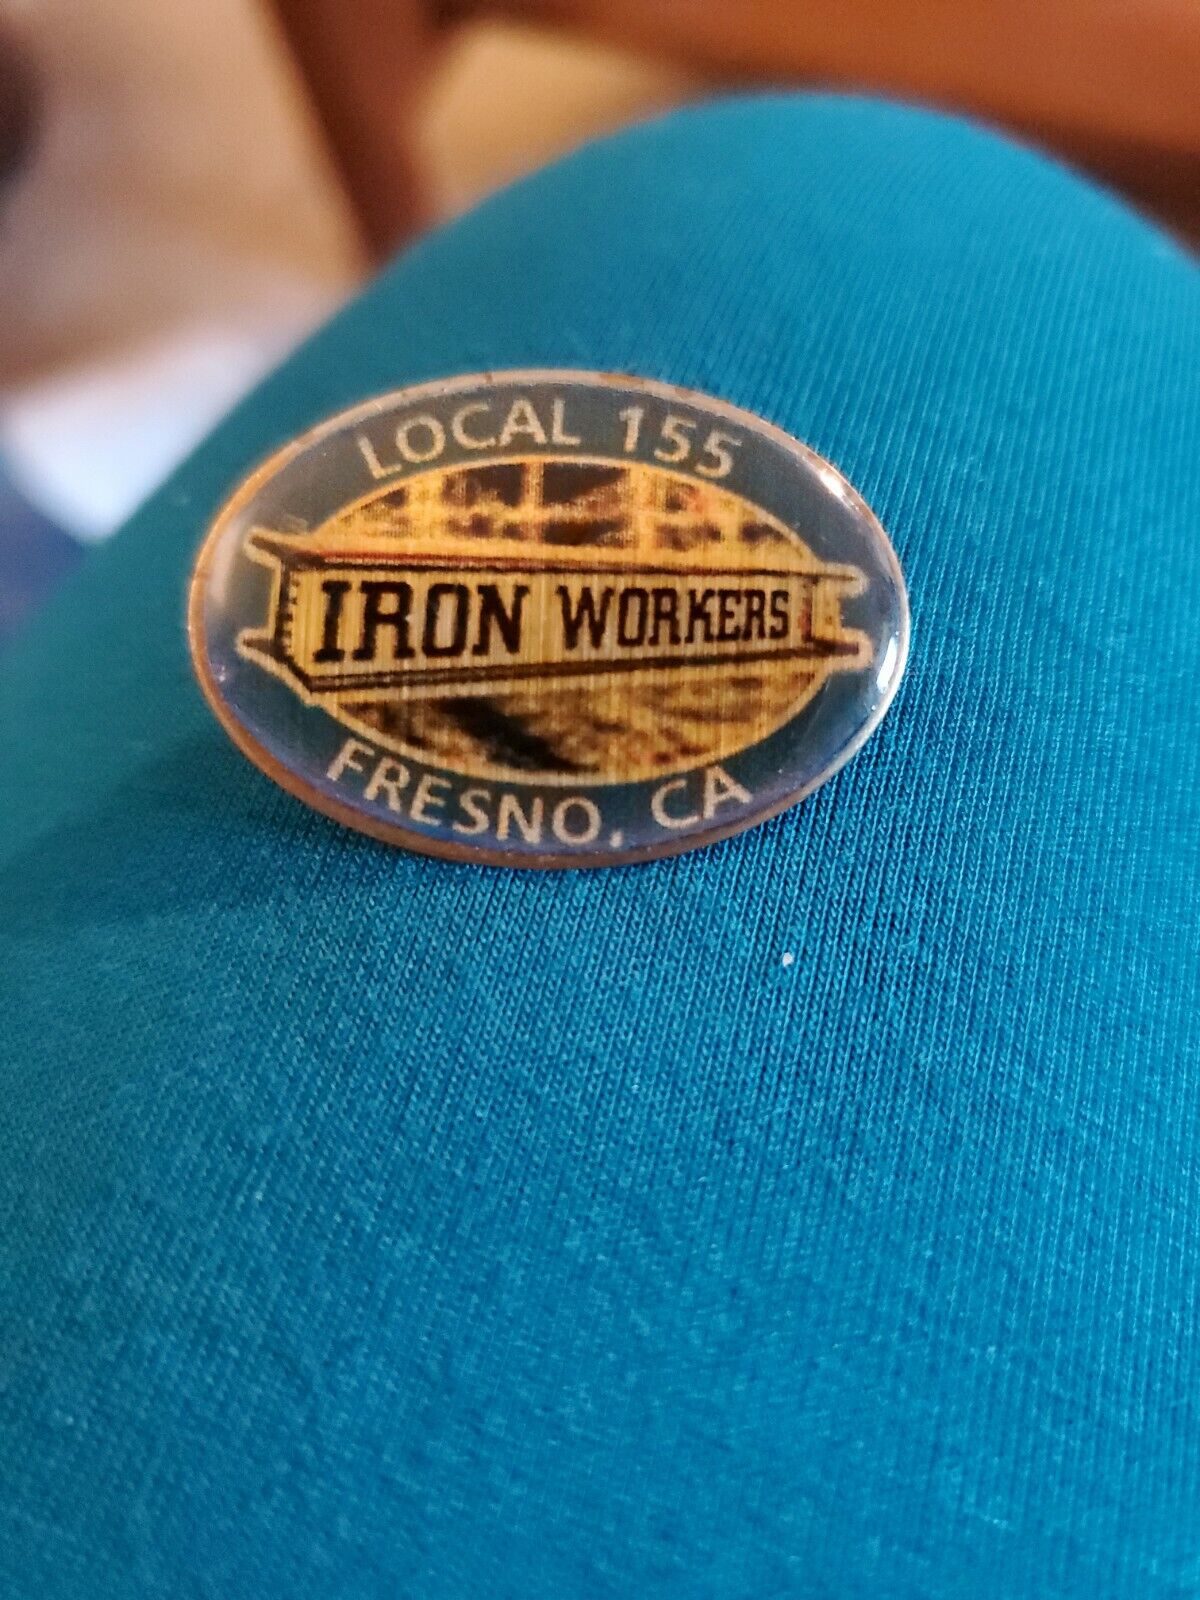 Ironworkers Union Lapel Pin Iron Workers Local 155 California